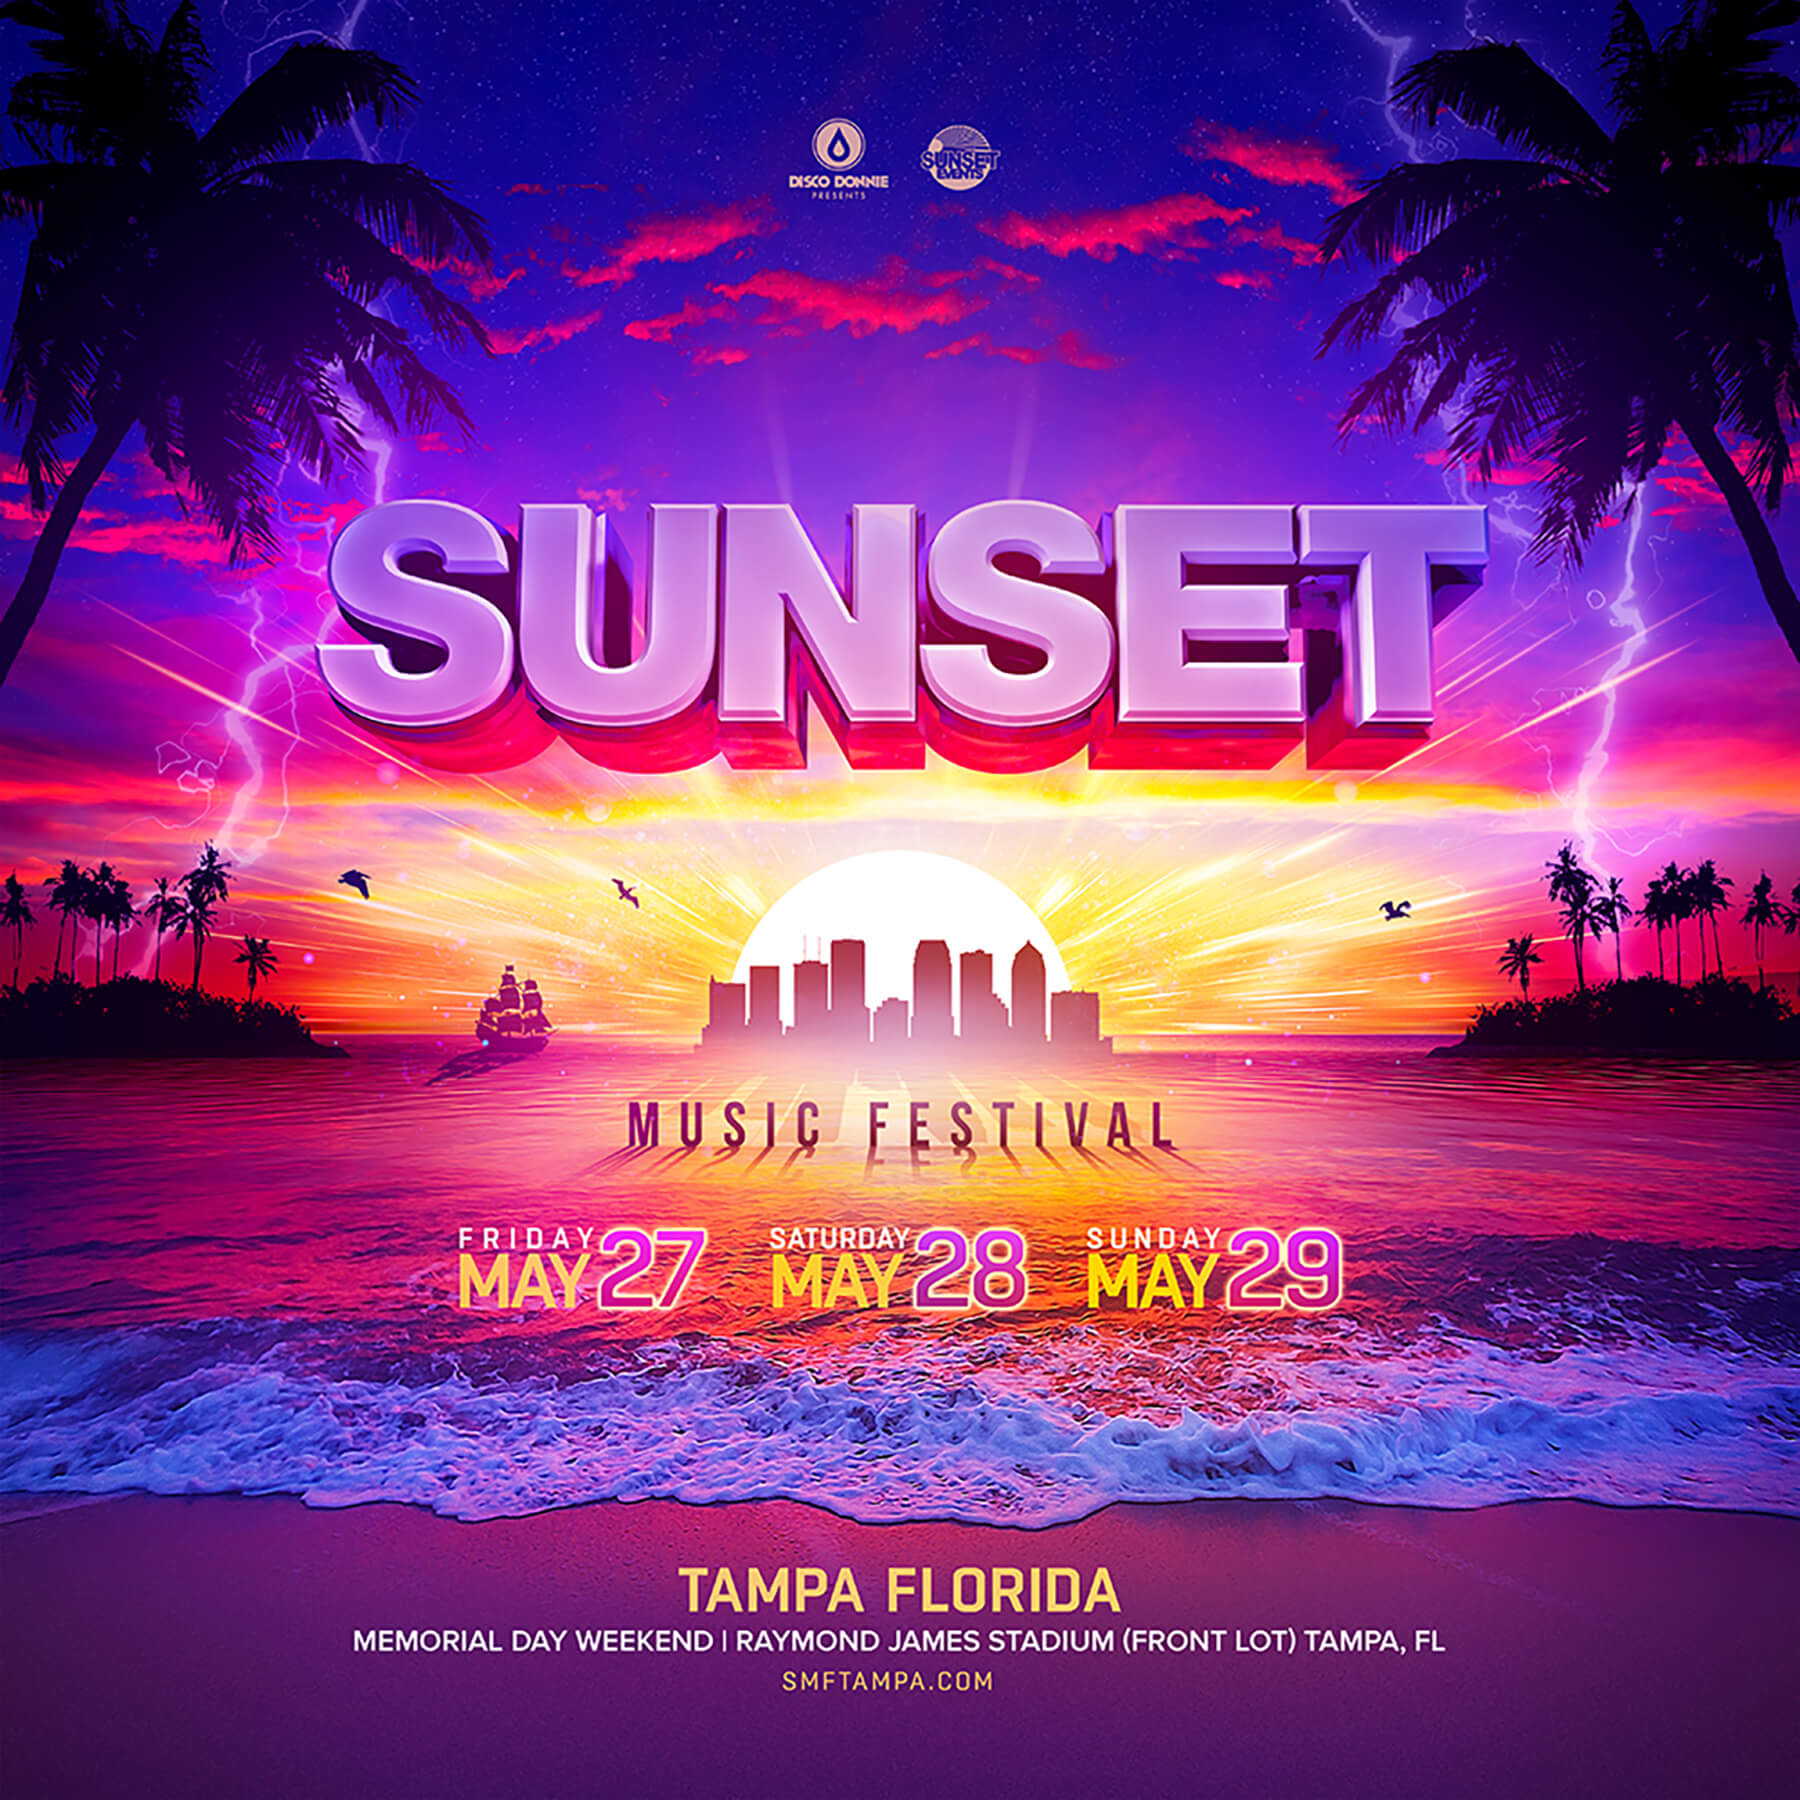 SMF Lineup 2022, Sunset Music Festival Payment Plan Discount Promo Code, 2022 Tickets, Tampa Florida May, Saturday, Sunday, GA Tickets